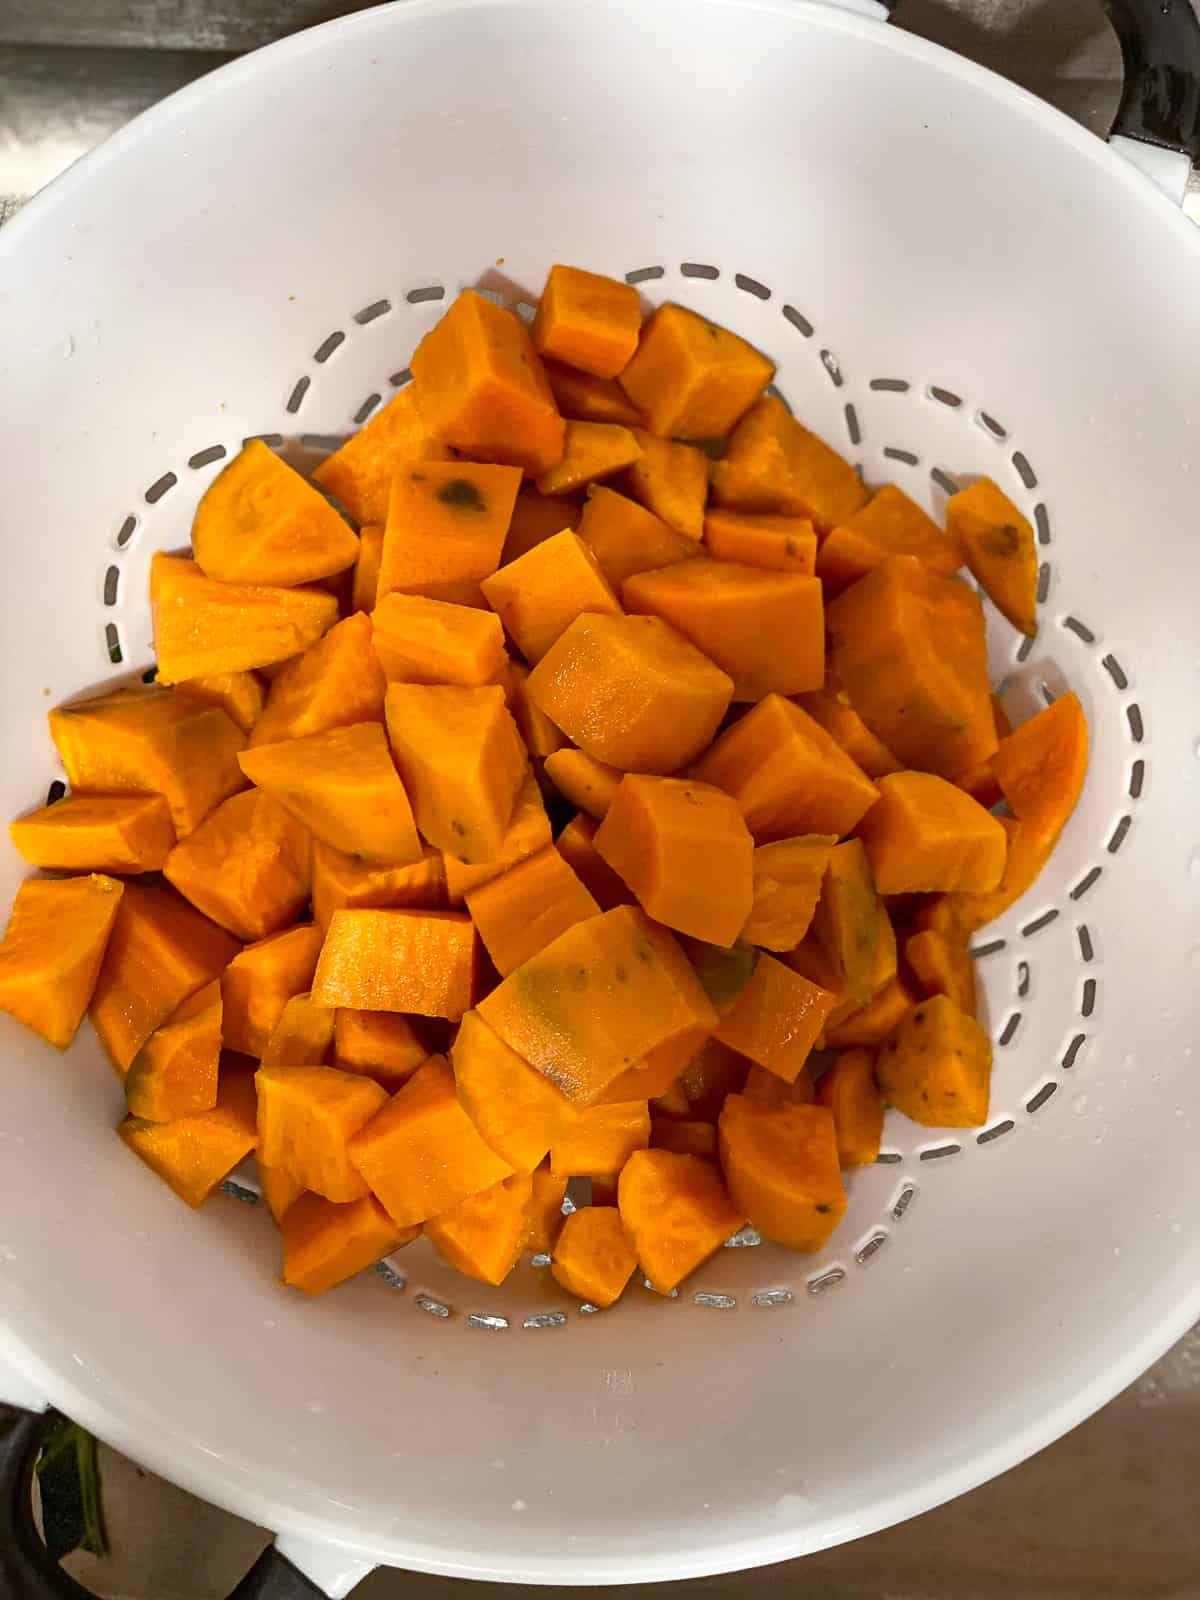 White colander with cooked sweet potatoes.